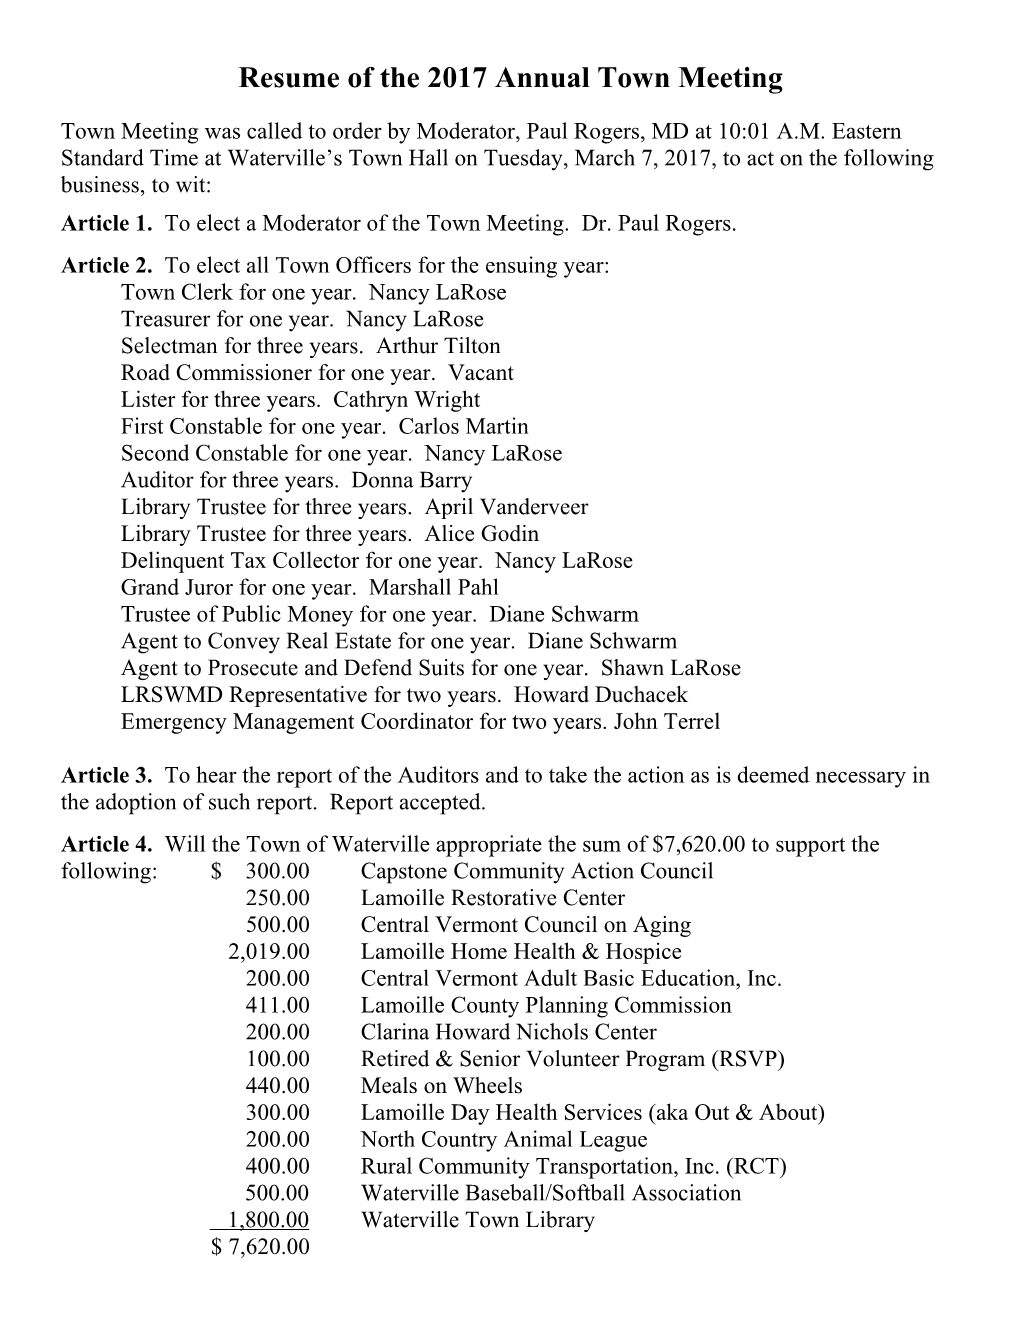 Resume of the 1999 Annual Town Meeting